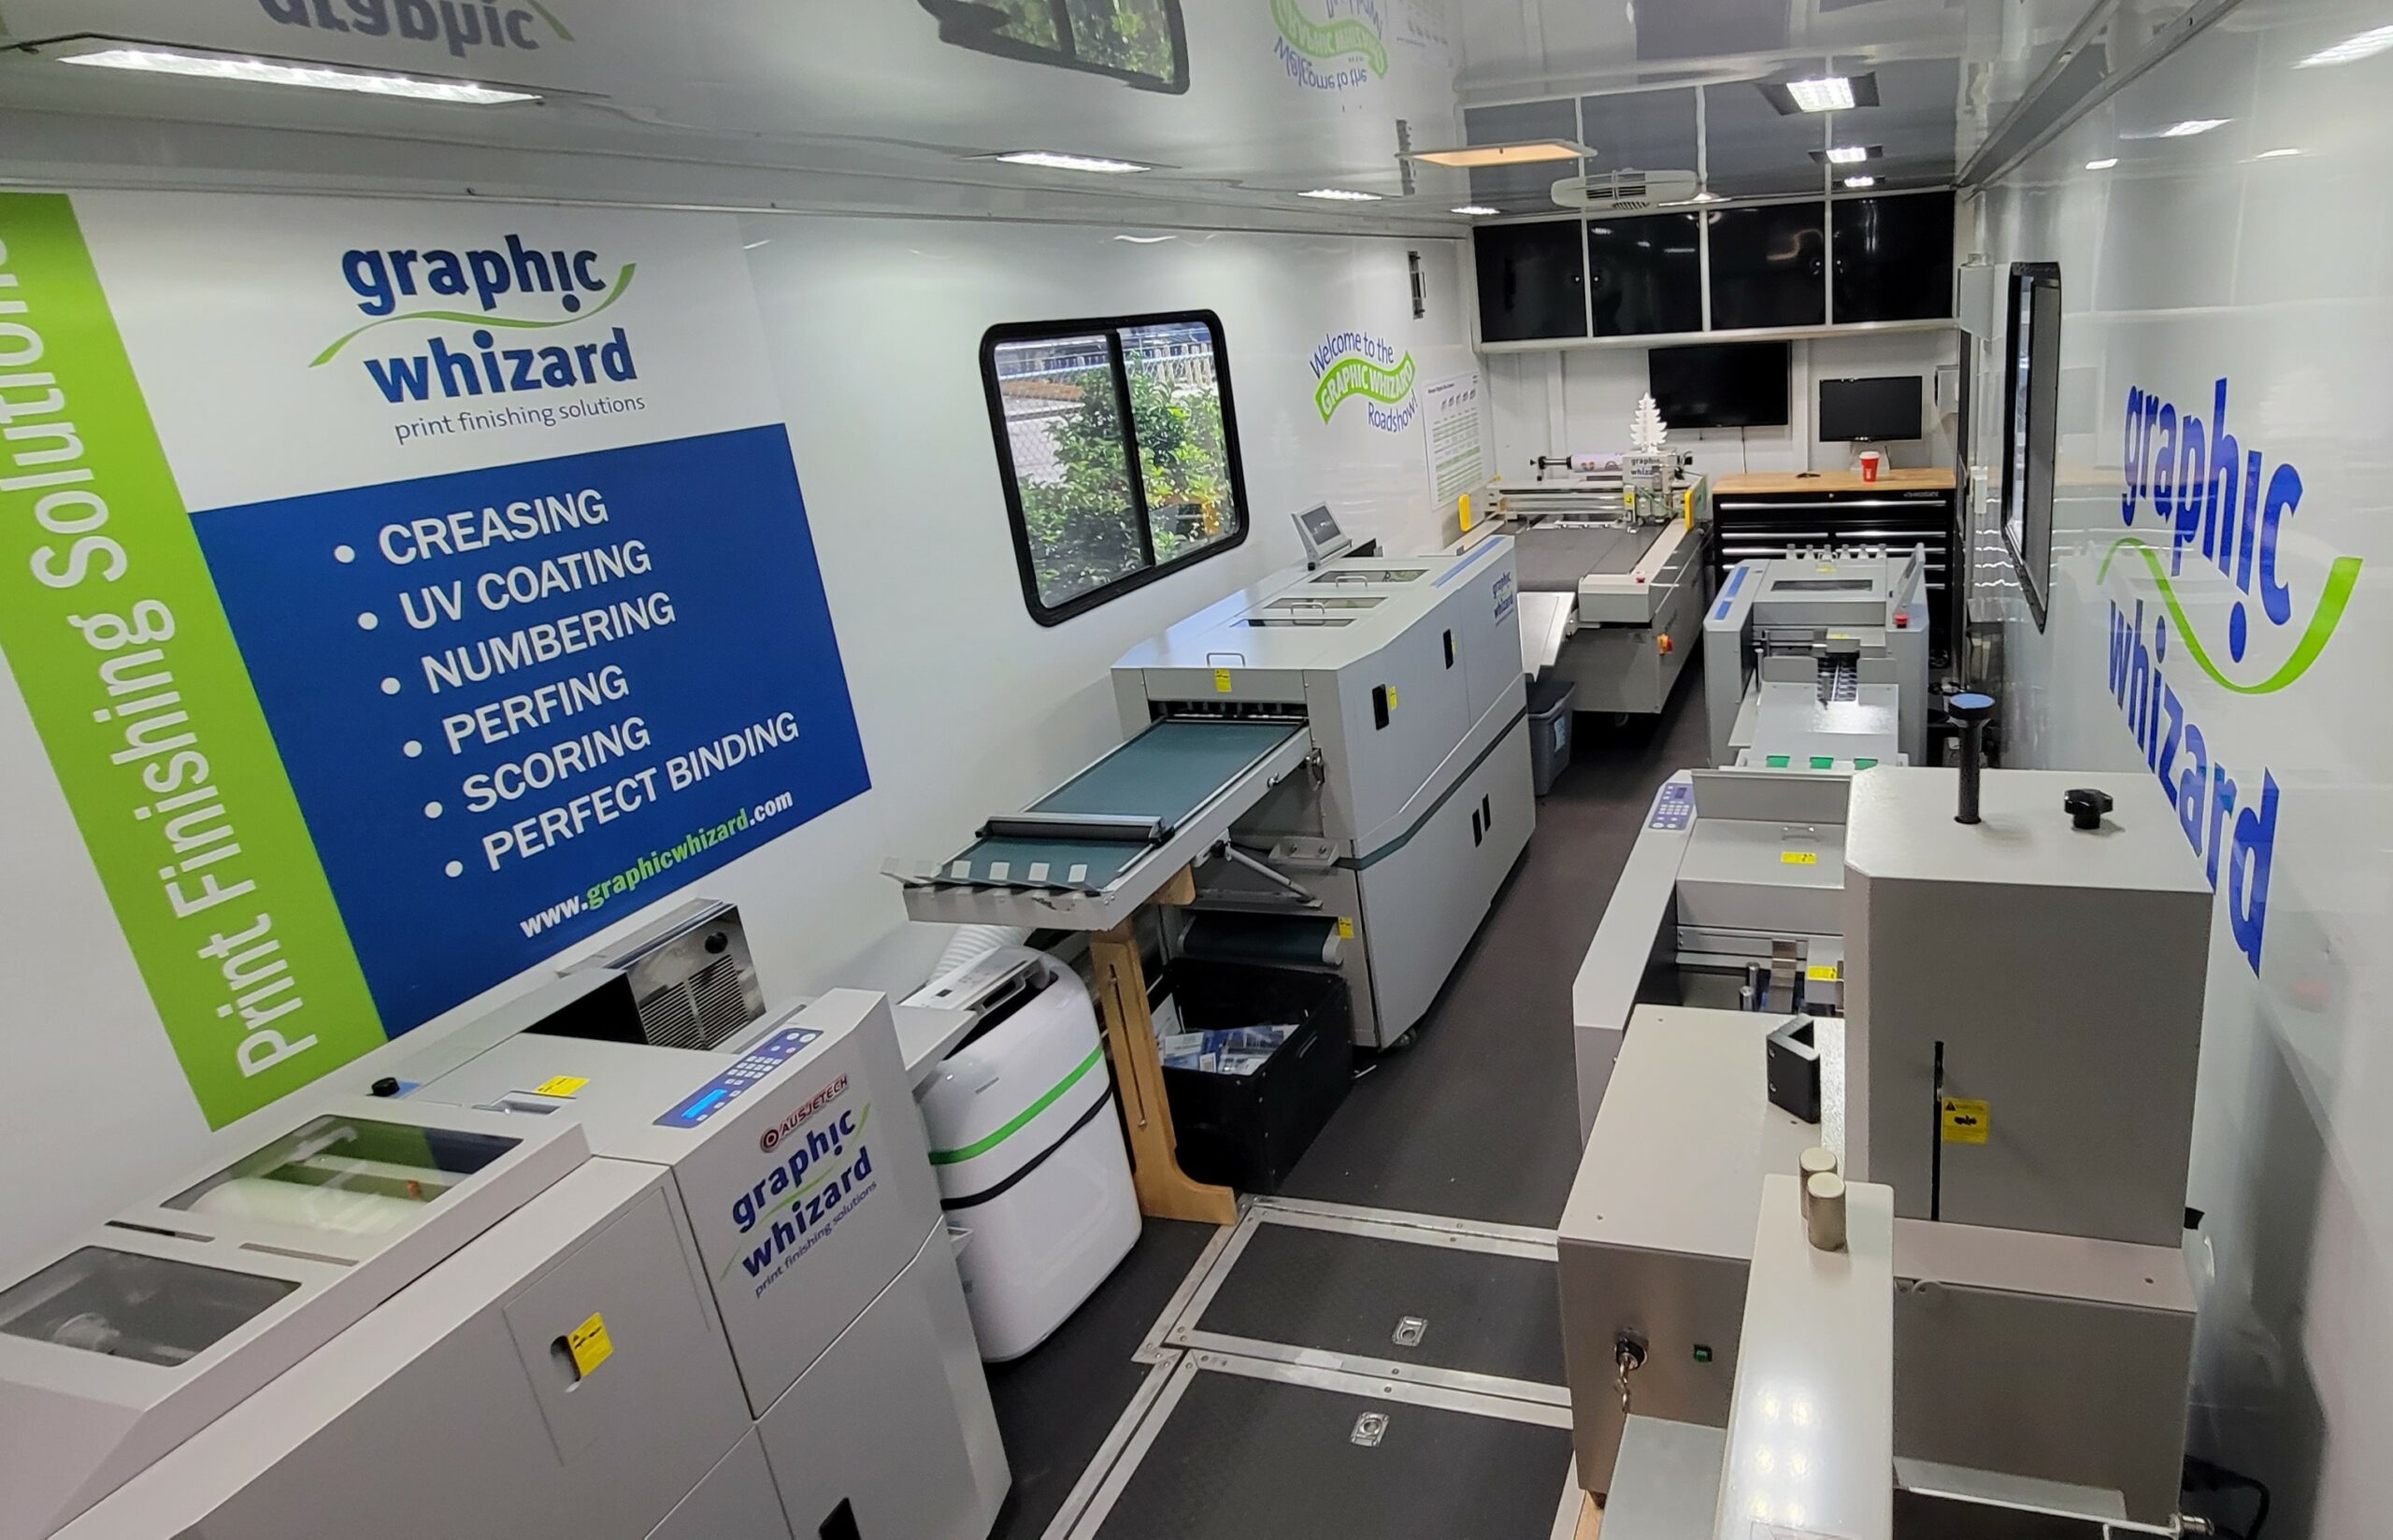 Konica Minolta Partners with Graphic Whizard to Offer Comprehensive Portfolio of Quality Finishing Equipment